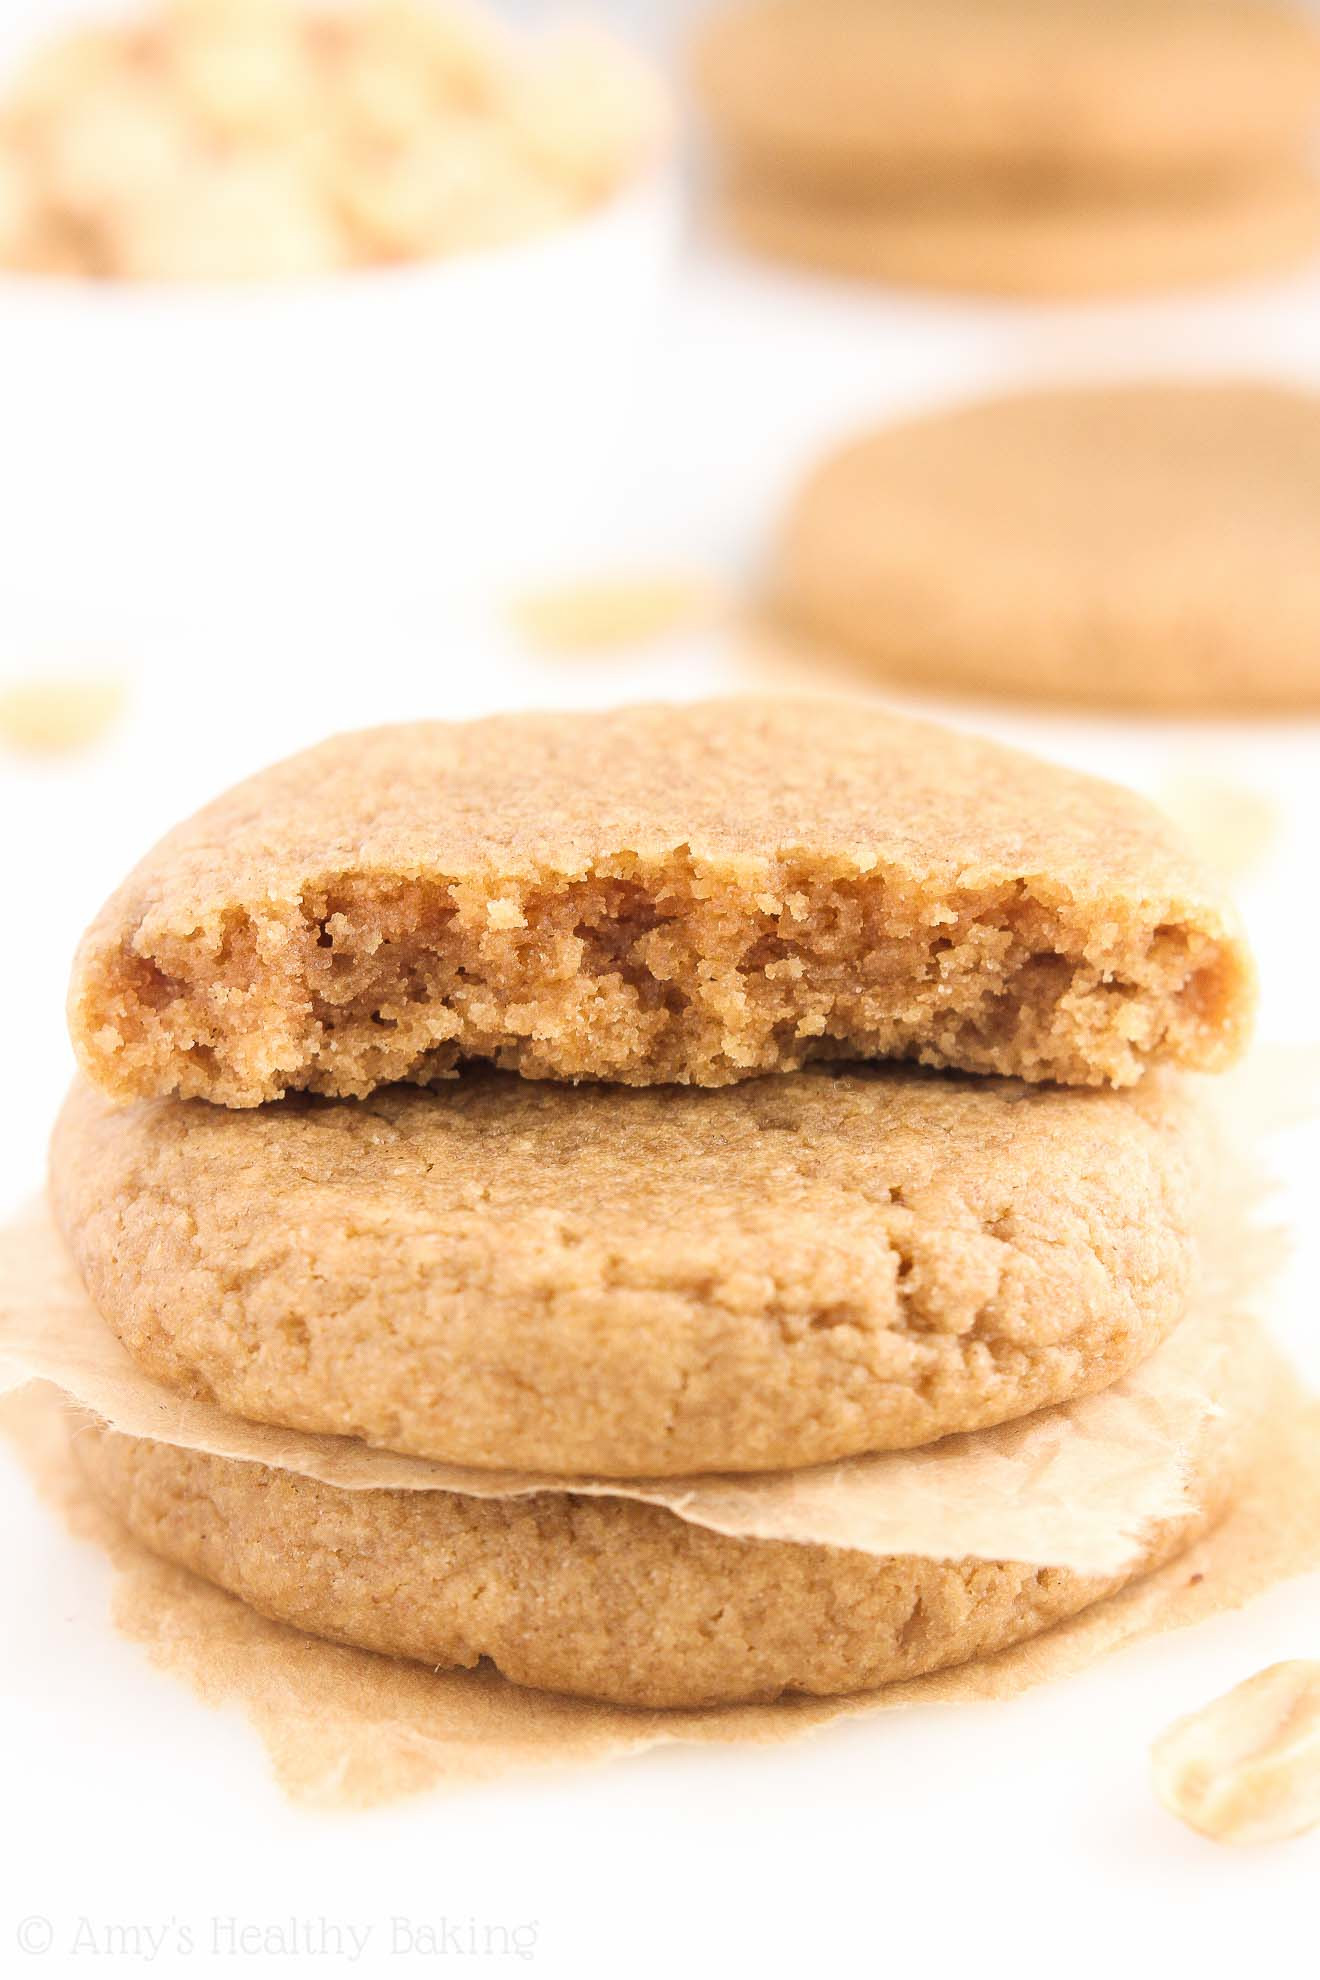 Peanut Butter Cookies Healthy
 VIDEO The Ultimate Healthy Soft & Chewy Peanut Butter